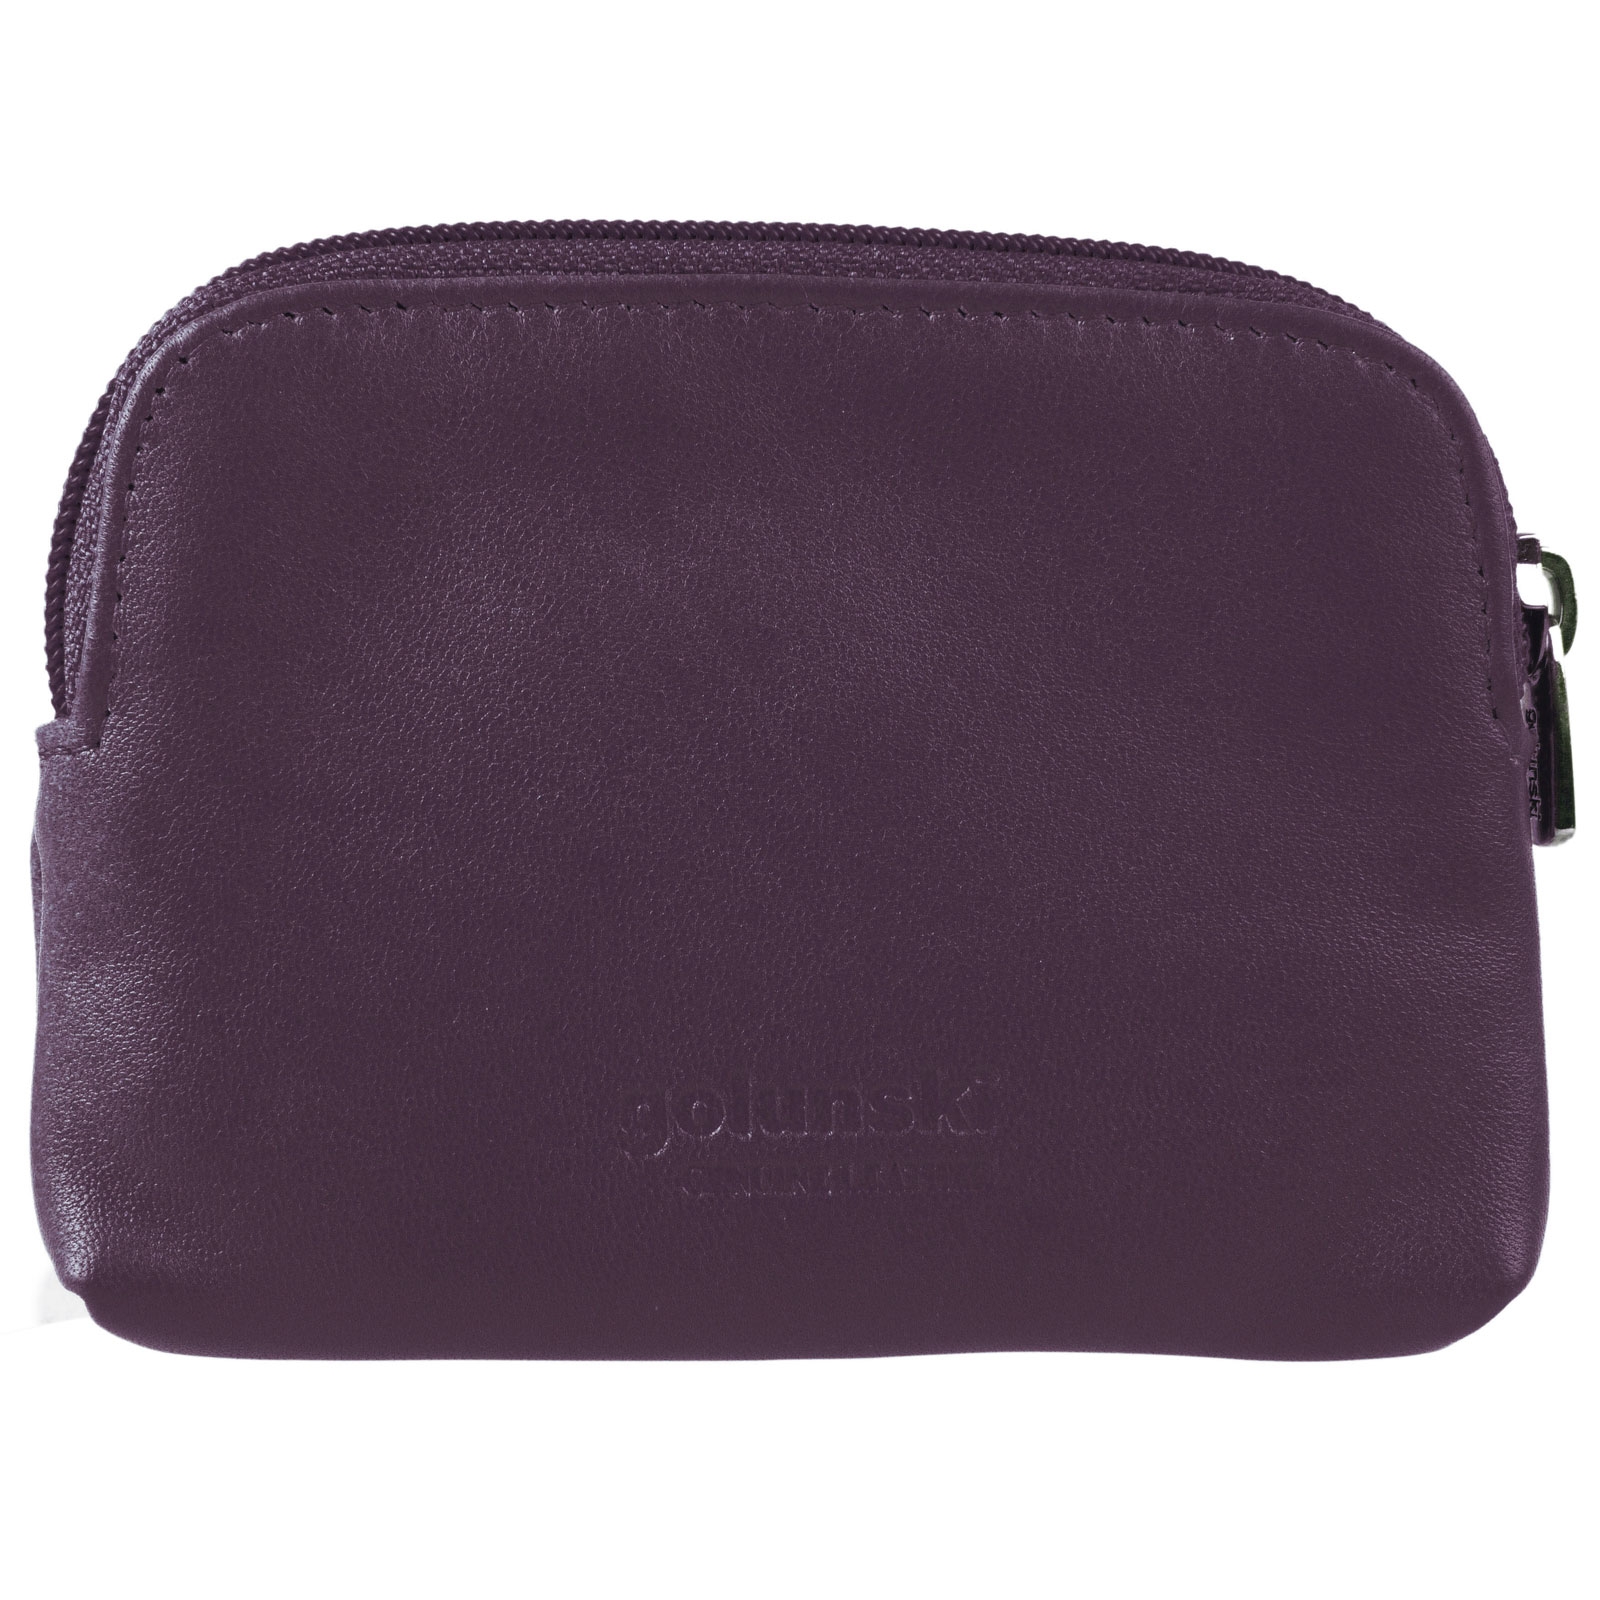 Ladies Super Soft Leather Coin Purse in 10 Colours by Golunski with ...